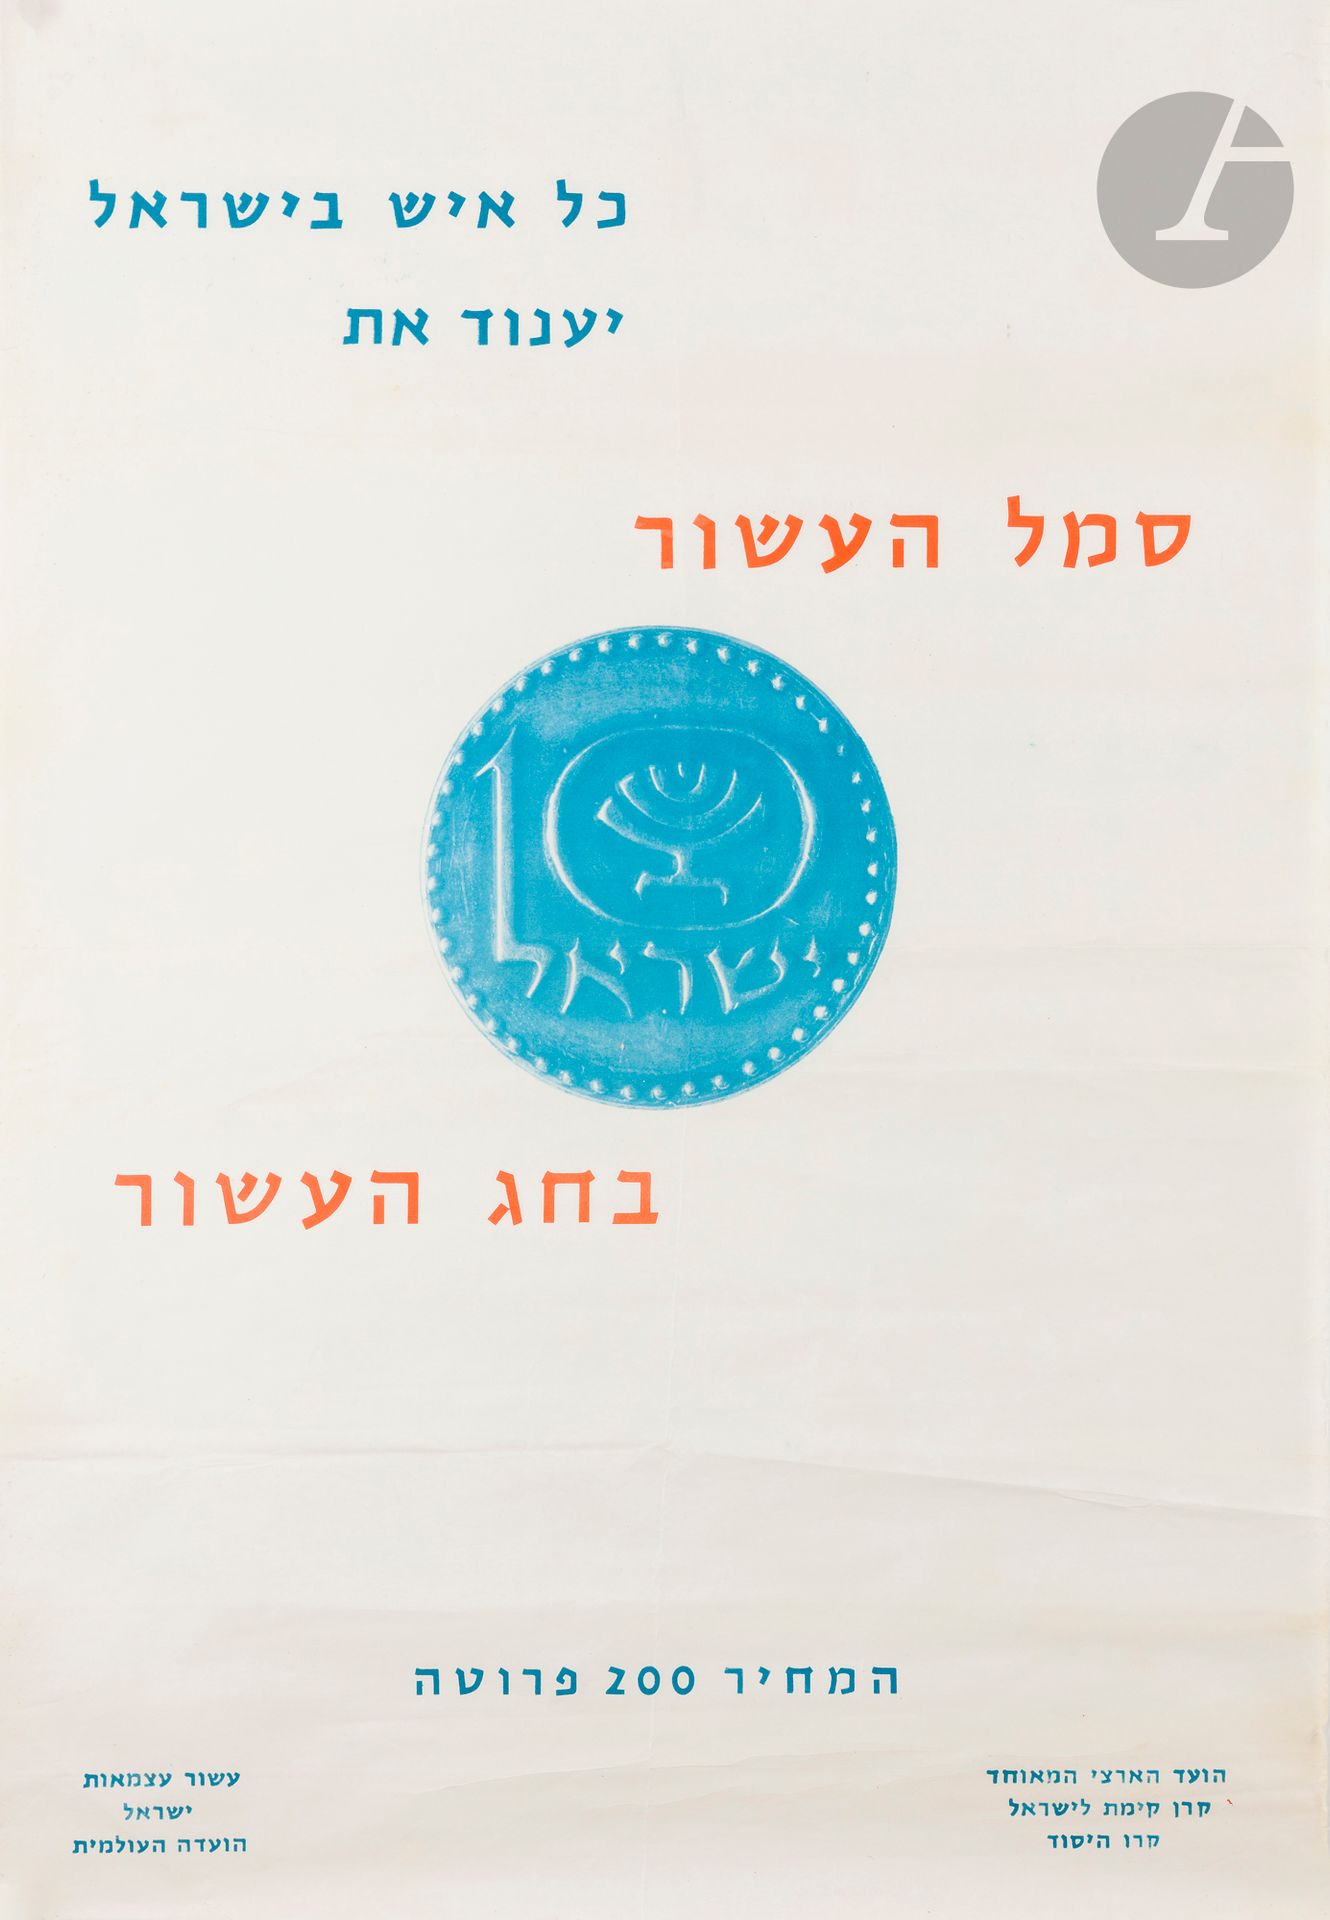 Null [ISRAEL]
Poster published by the K.K.L. On the occasion of the 10th anniver&hellip;